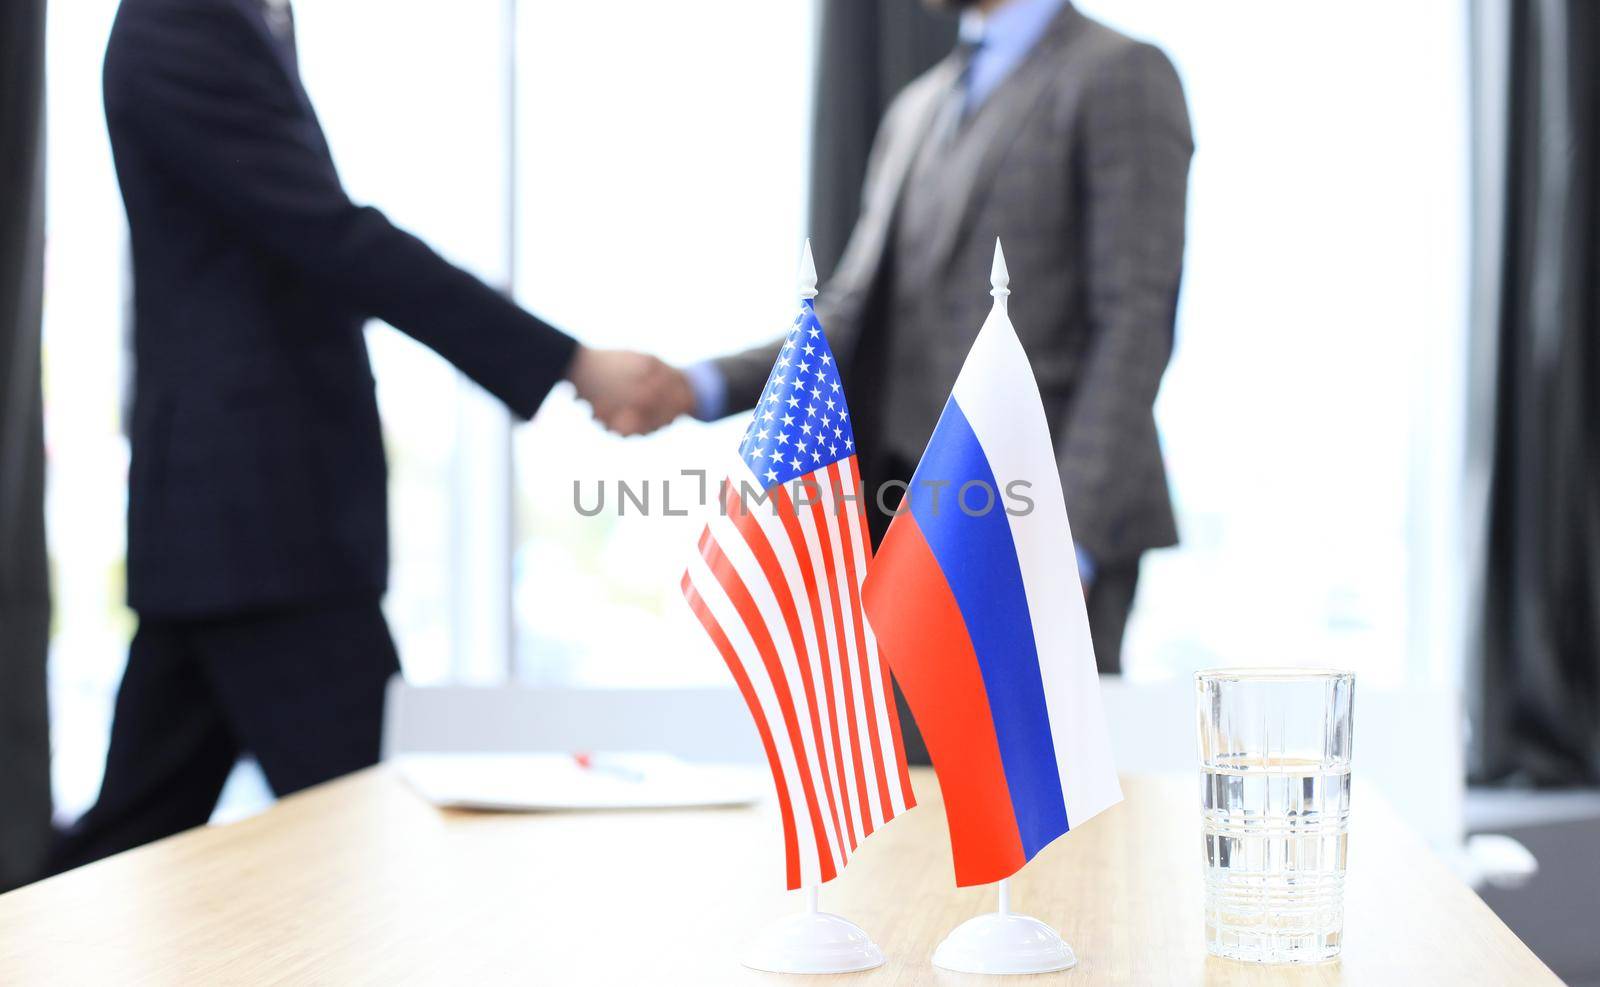 European Union and American leaders shaking hands on a deal agreement by tsyhun